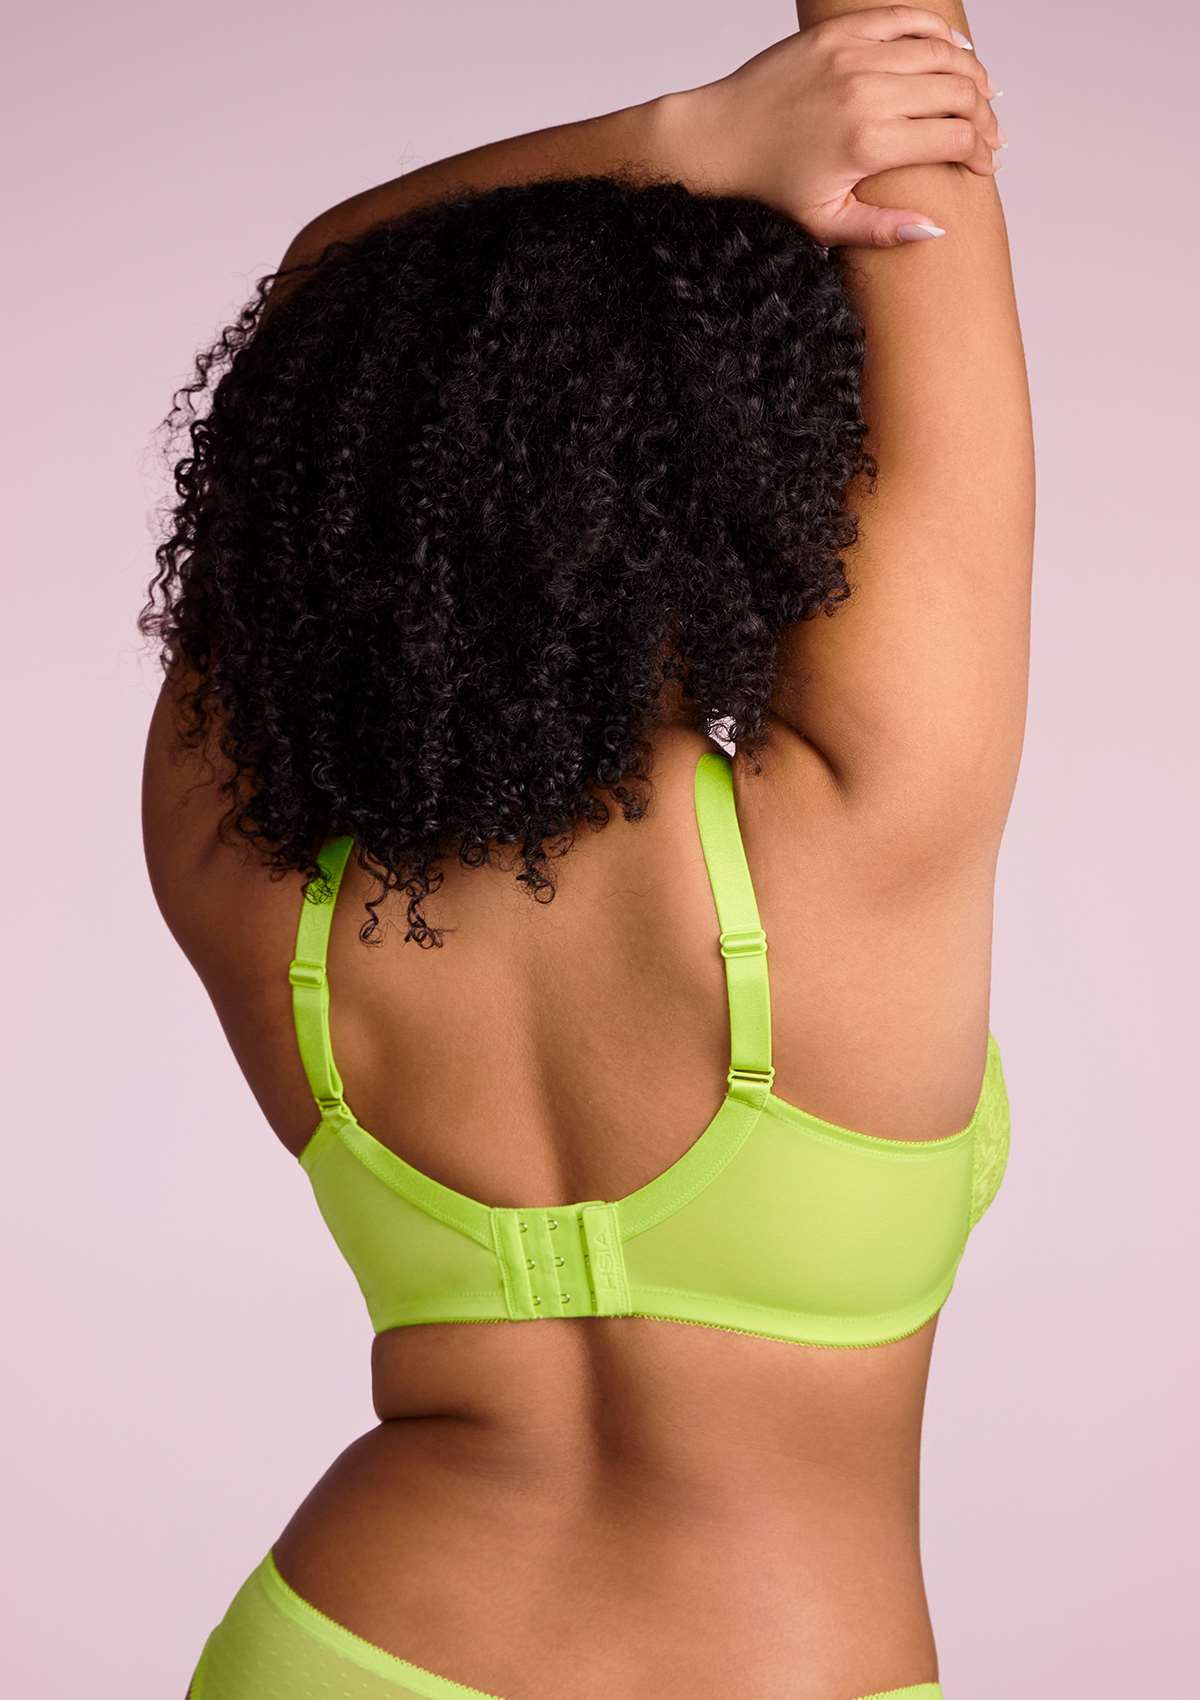 HSIA Enchante Full Cup Minimizing Bra: Supportive Unlined Lace Bra - Lime Green / 42 / G